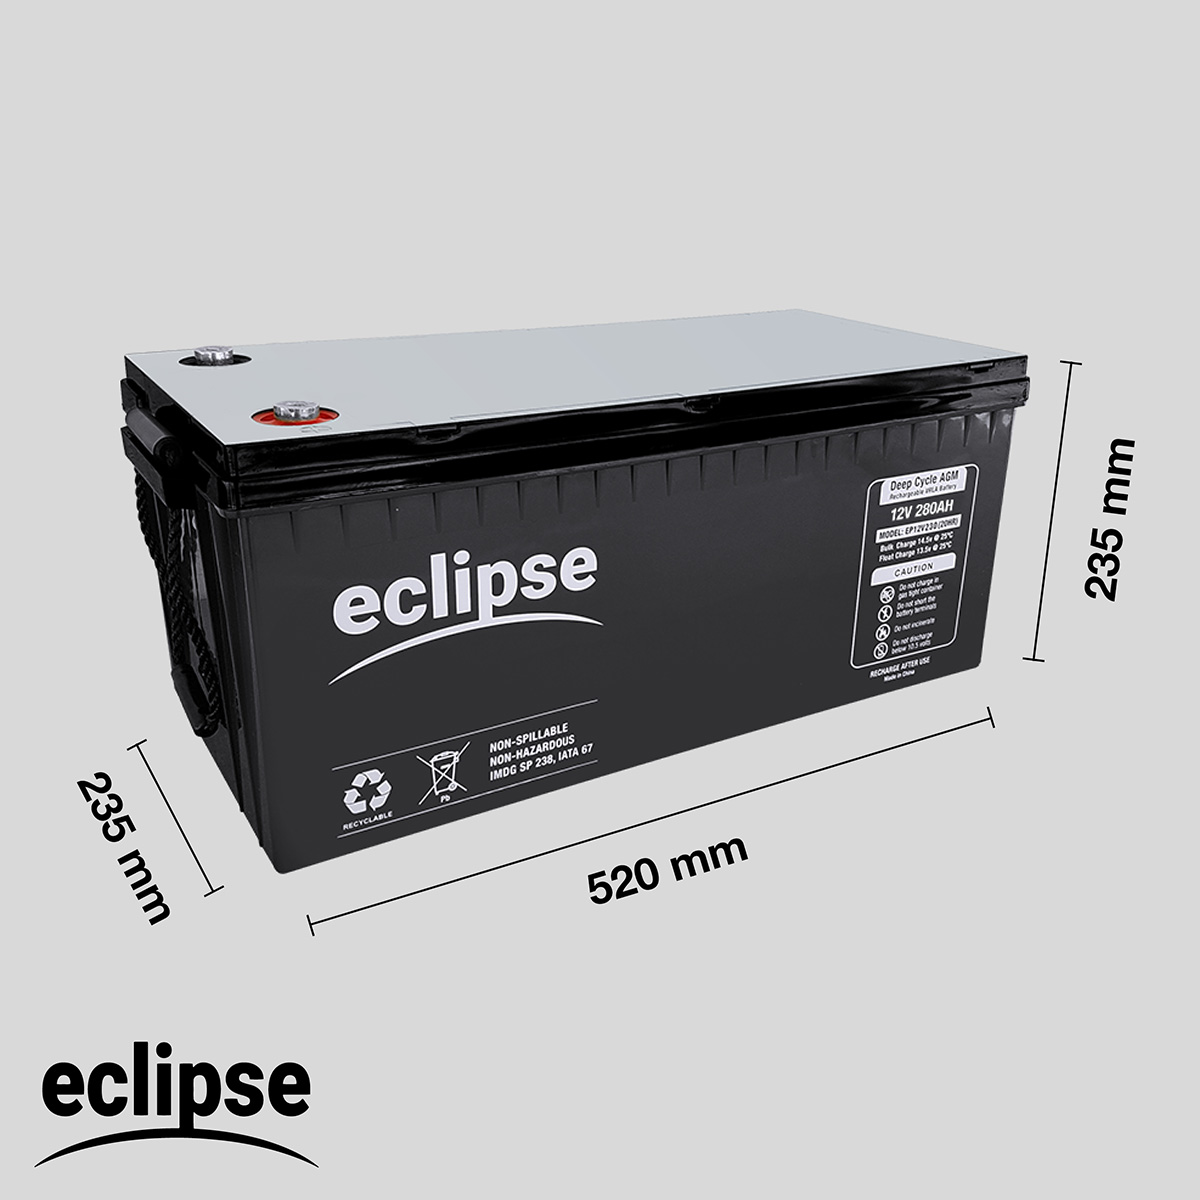 Eclipse 130AH AGM Deep Cycle Battery 